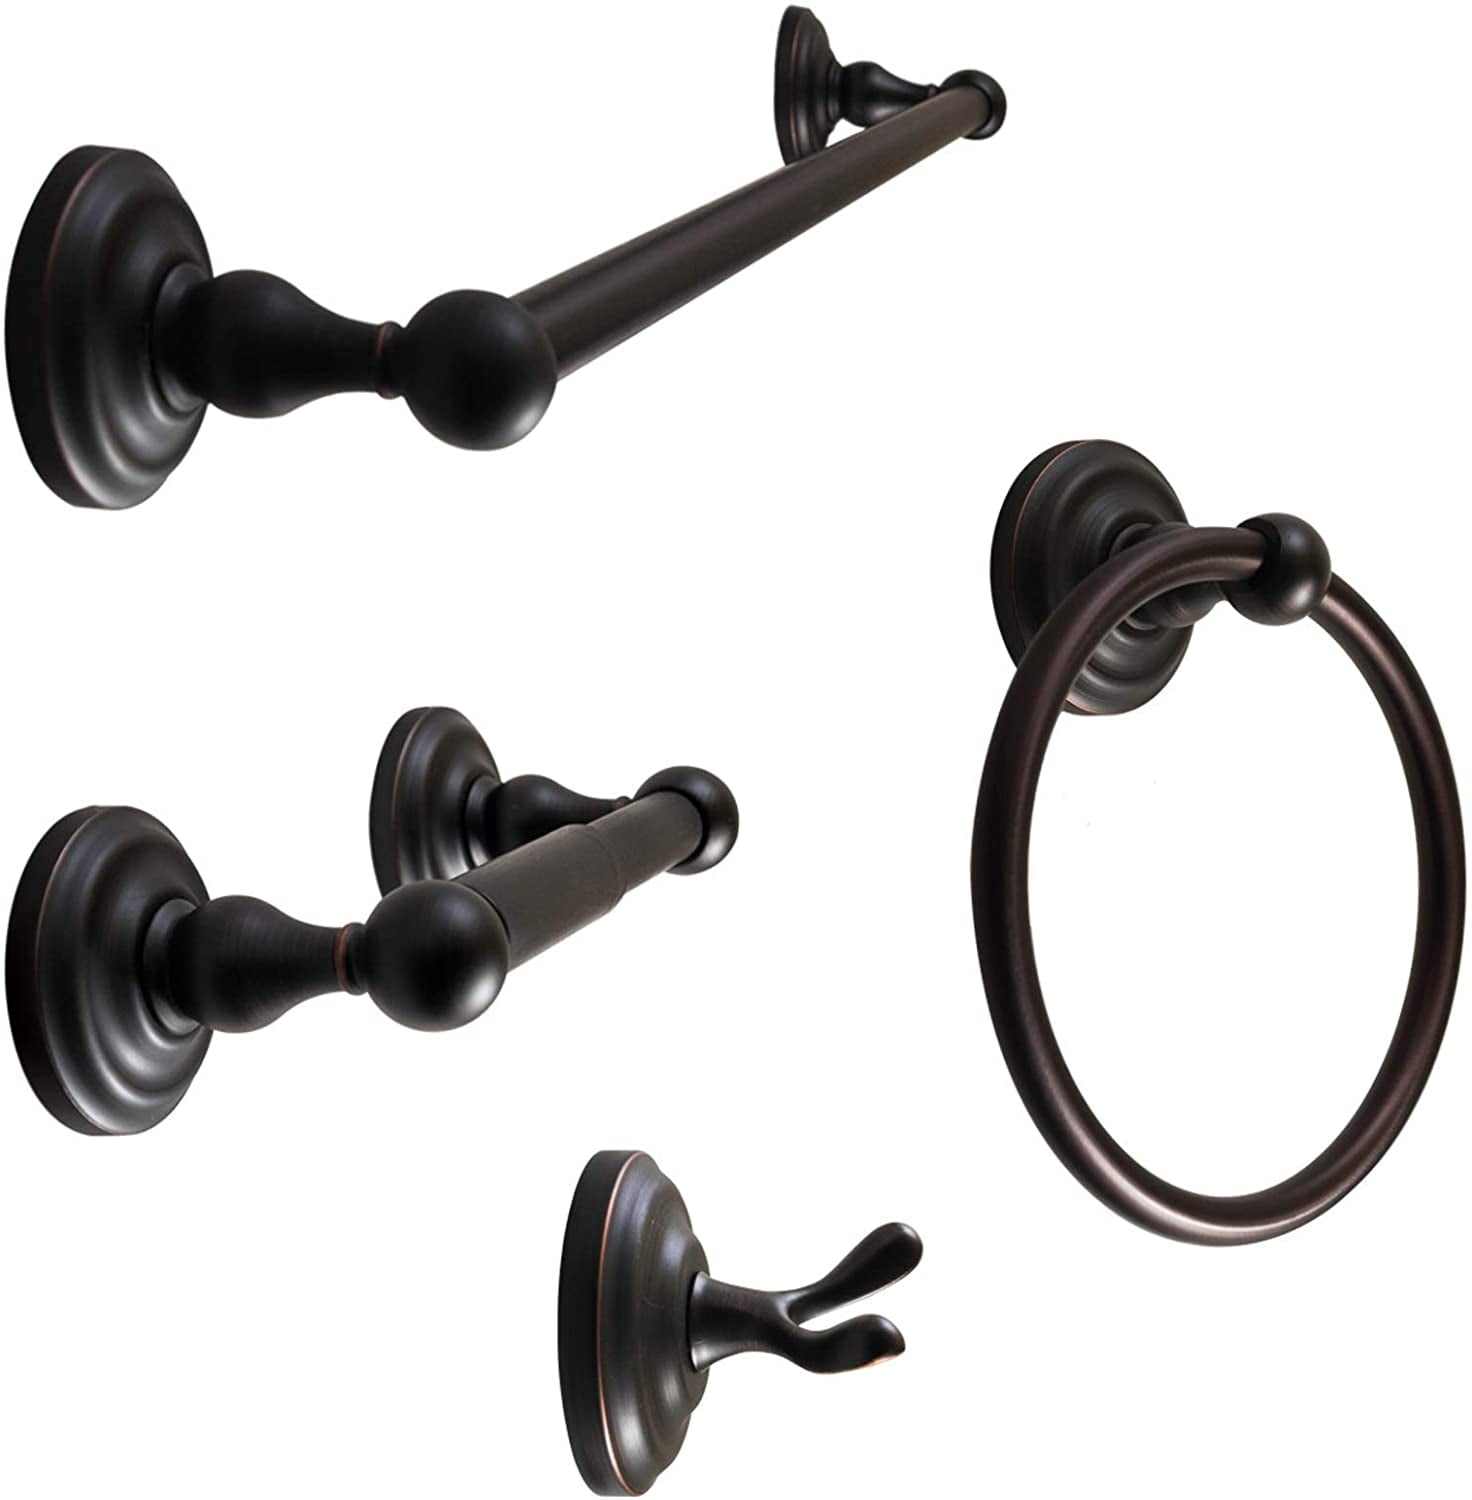 Oil Rubbed Bronze Bathroom Hardware Accessories Set Towel Rail Rack Wall Mounted 